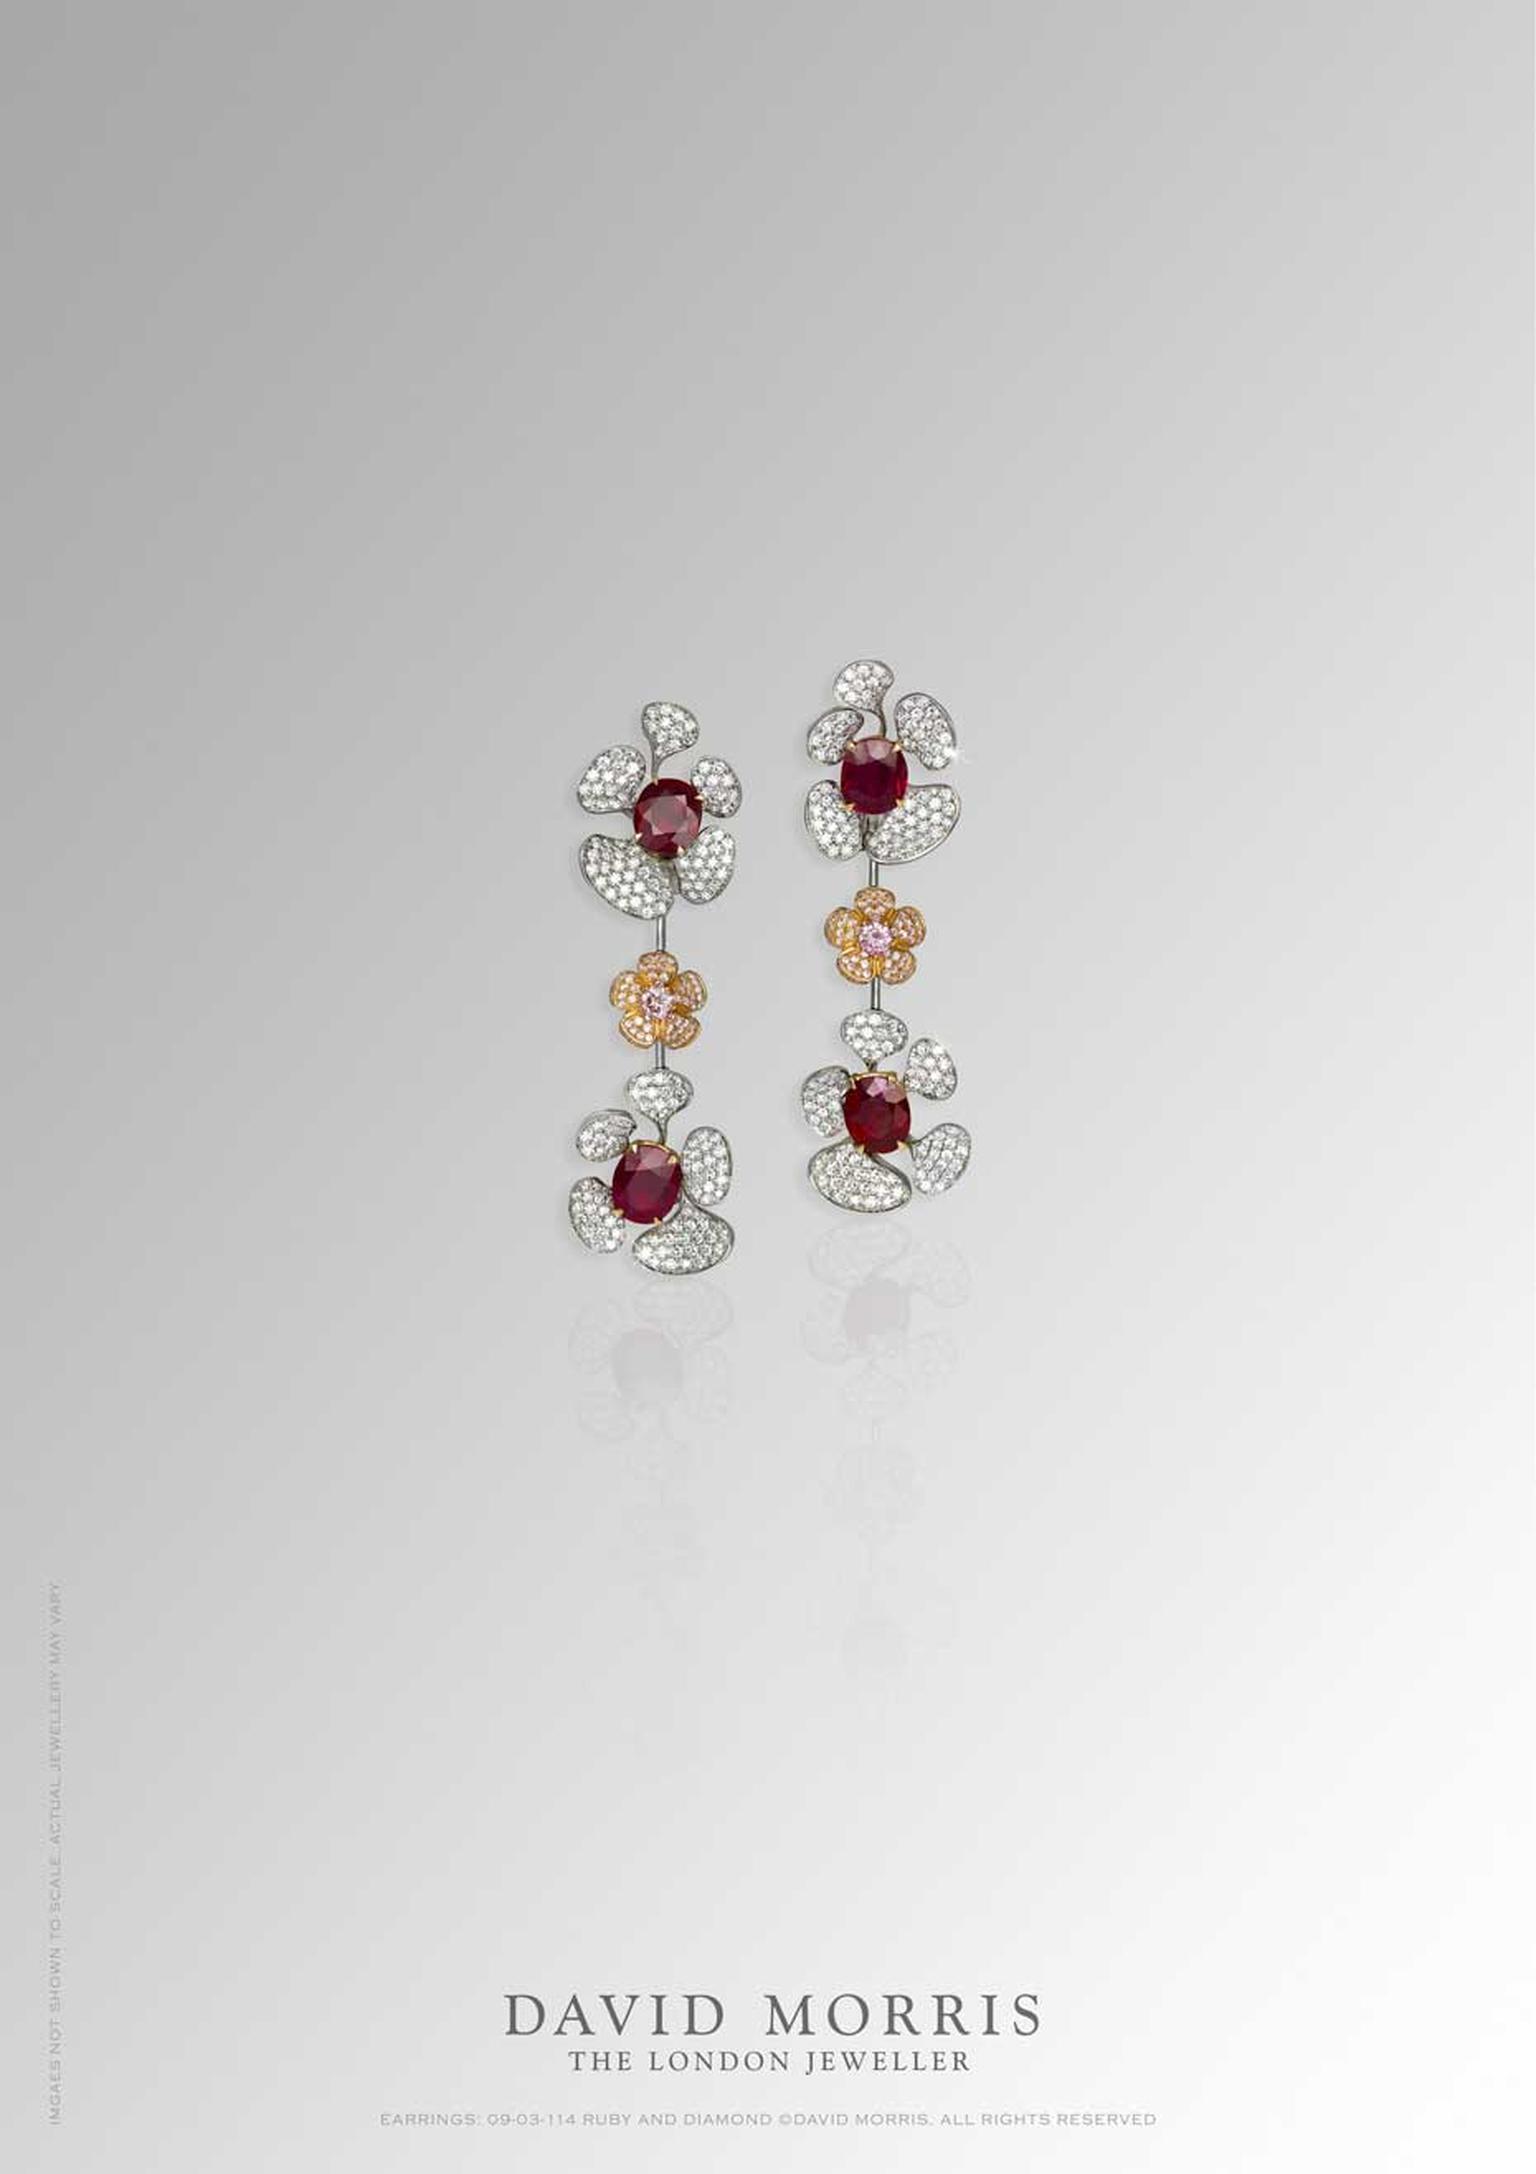 David Morris Wild Flower Burmese ruby earrings with white and pink diamonds, set with 14.37ct rubies.